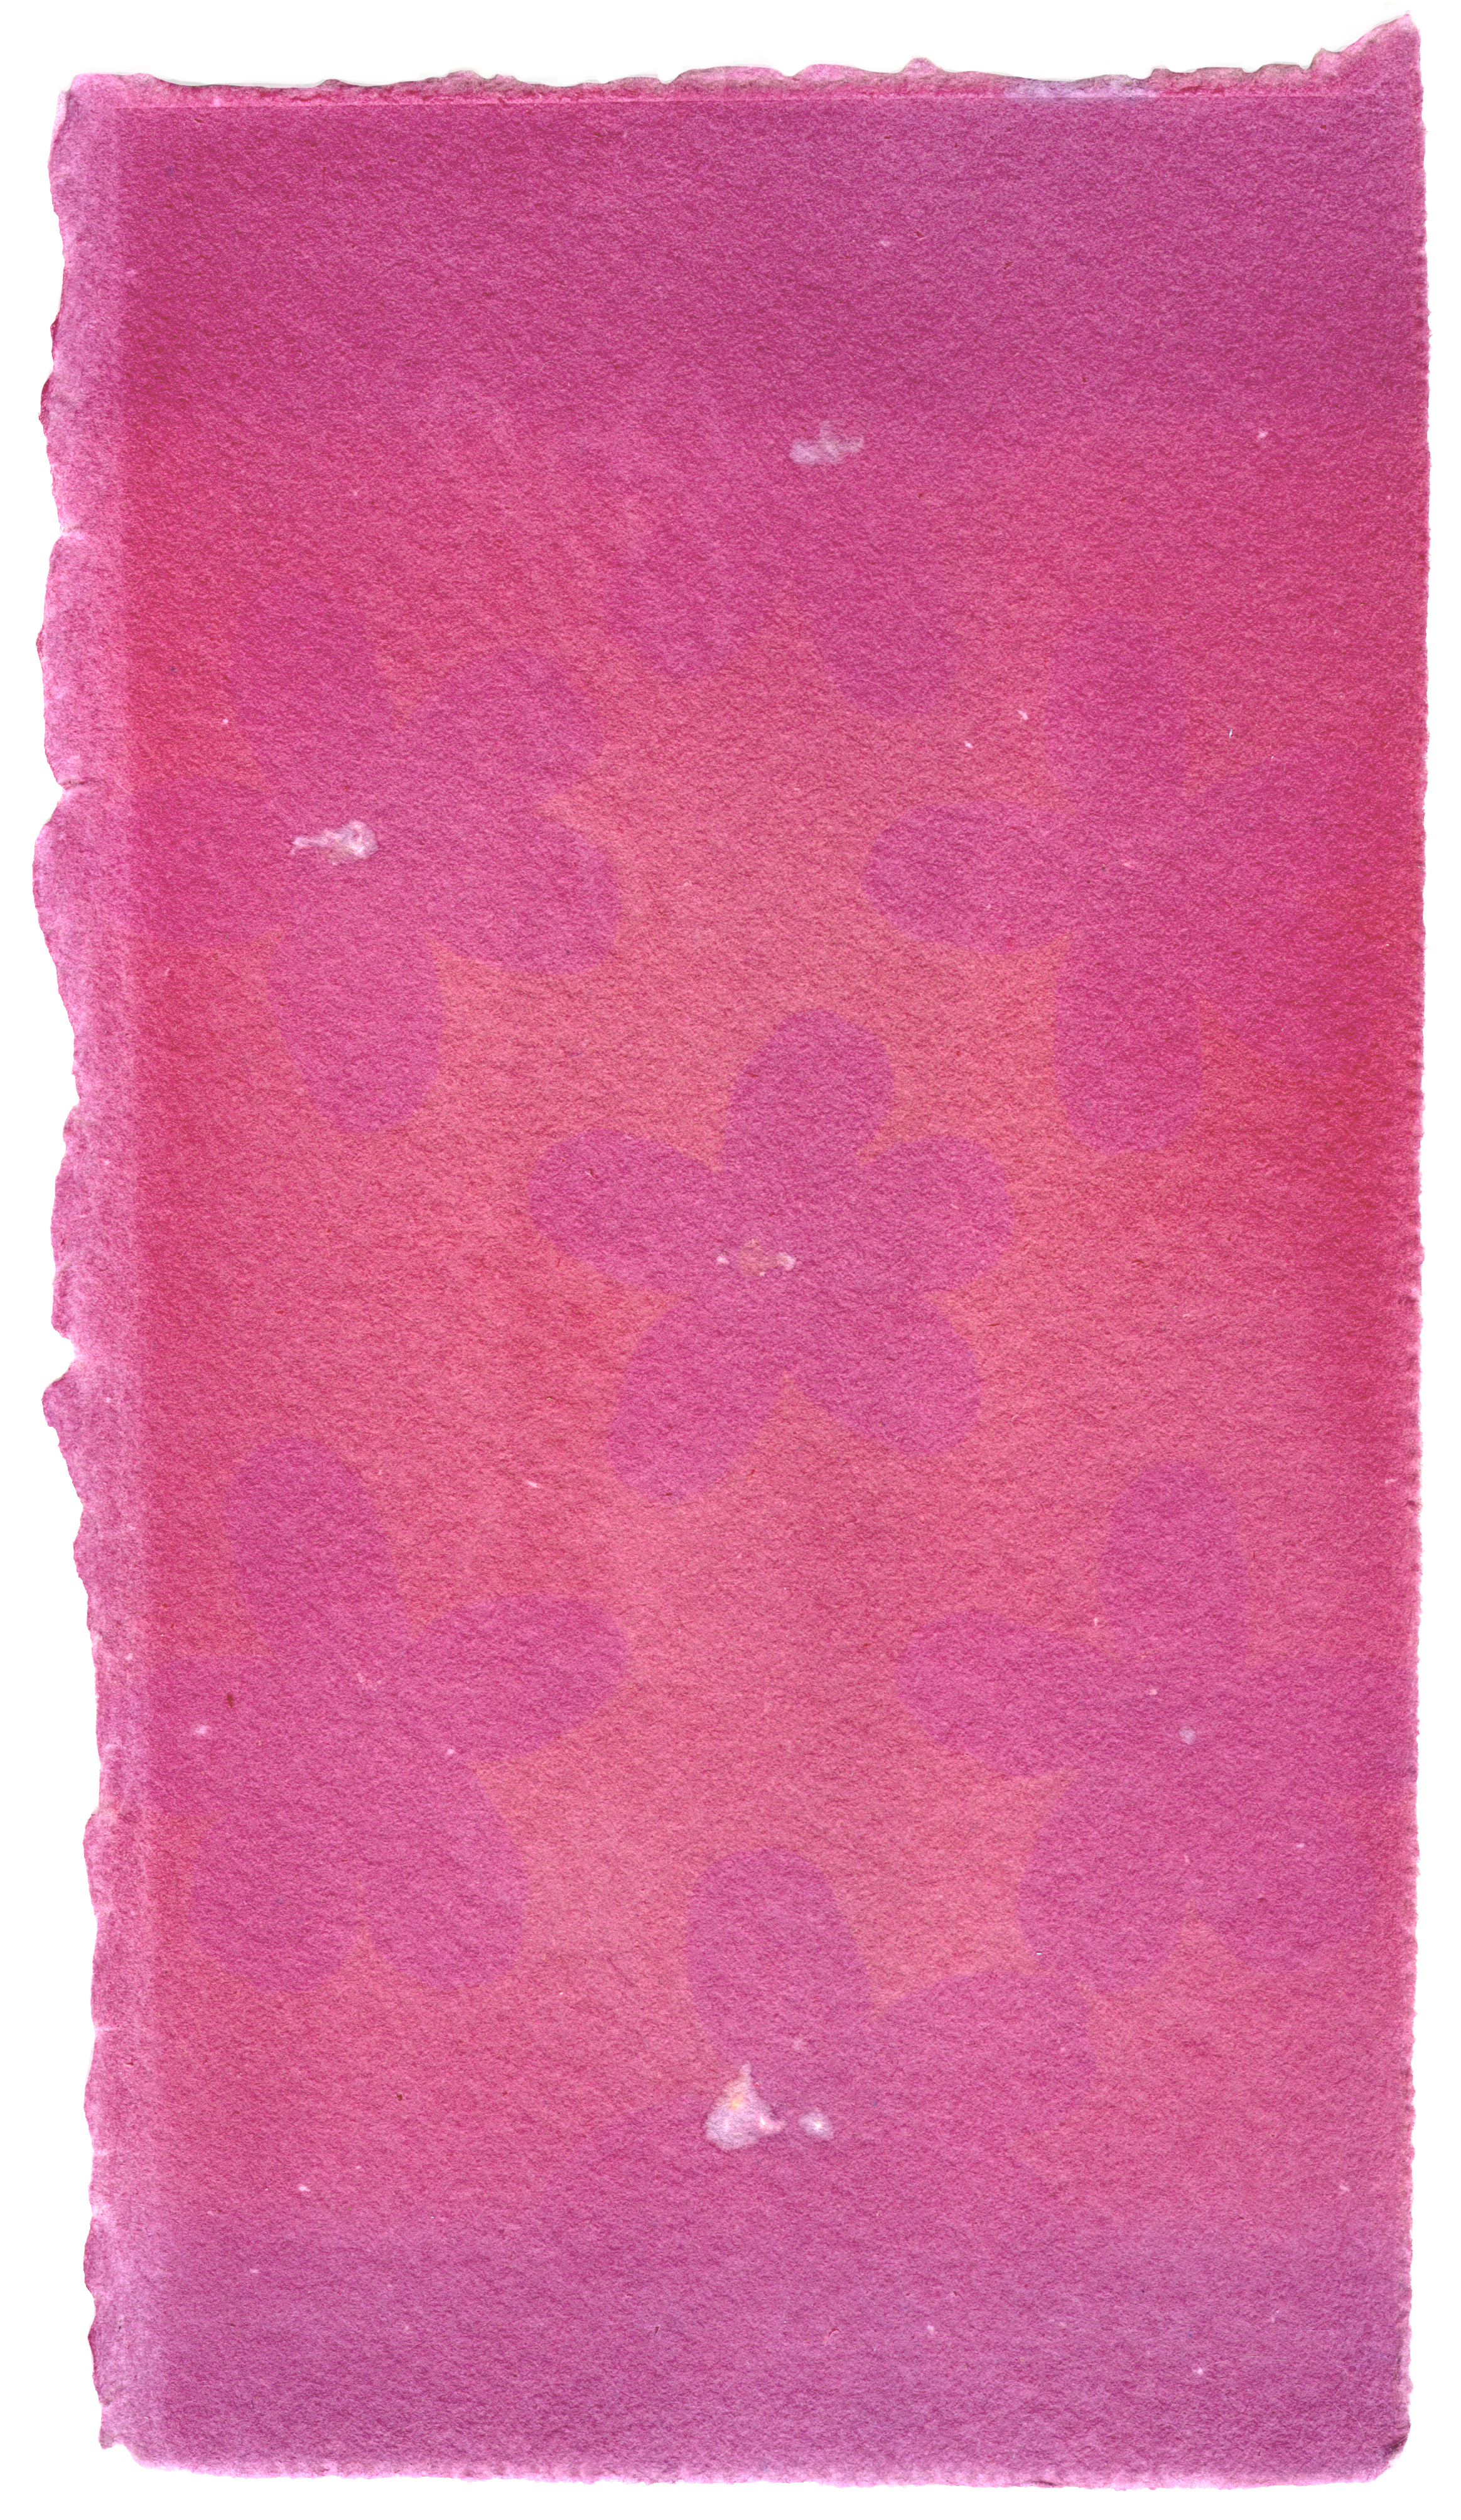 Red Rhododendron Ferrugineum Flowers with Red Rhododendron Ferrugineum Emulsion, 6.5" x 3.5", 2018